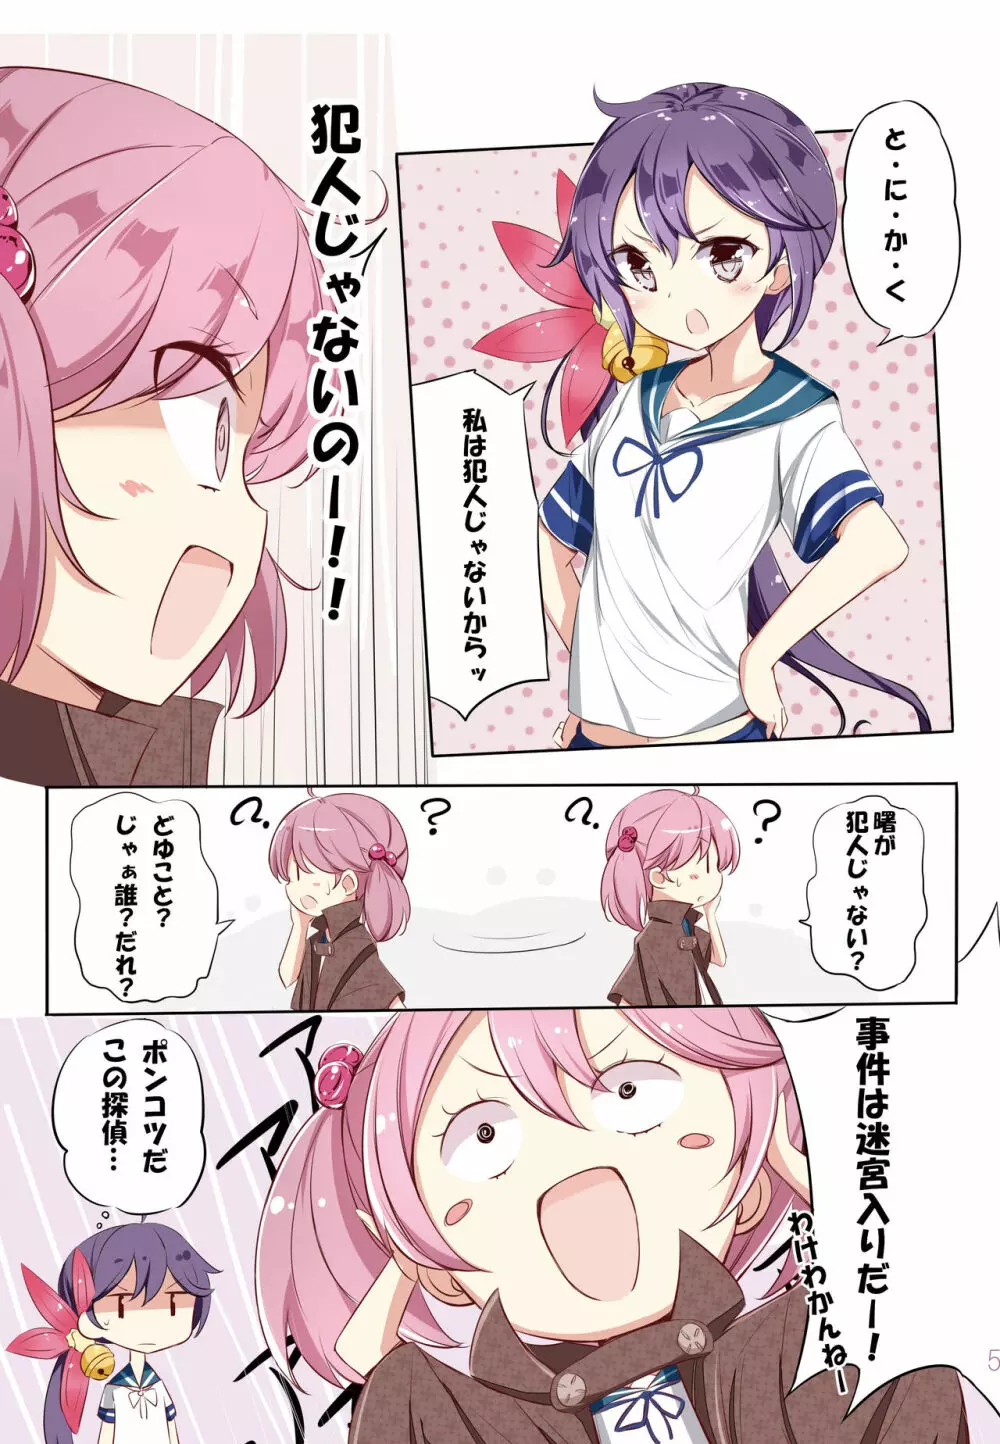 hamaken collection 総集編vol 9～12 プラス 七駆の乳くらべ - page78